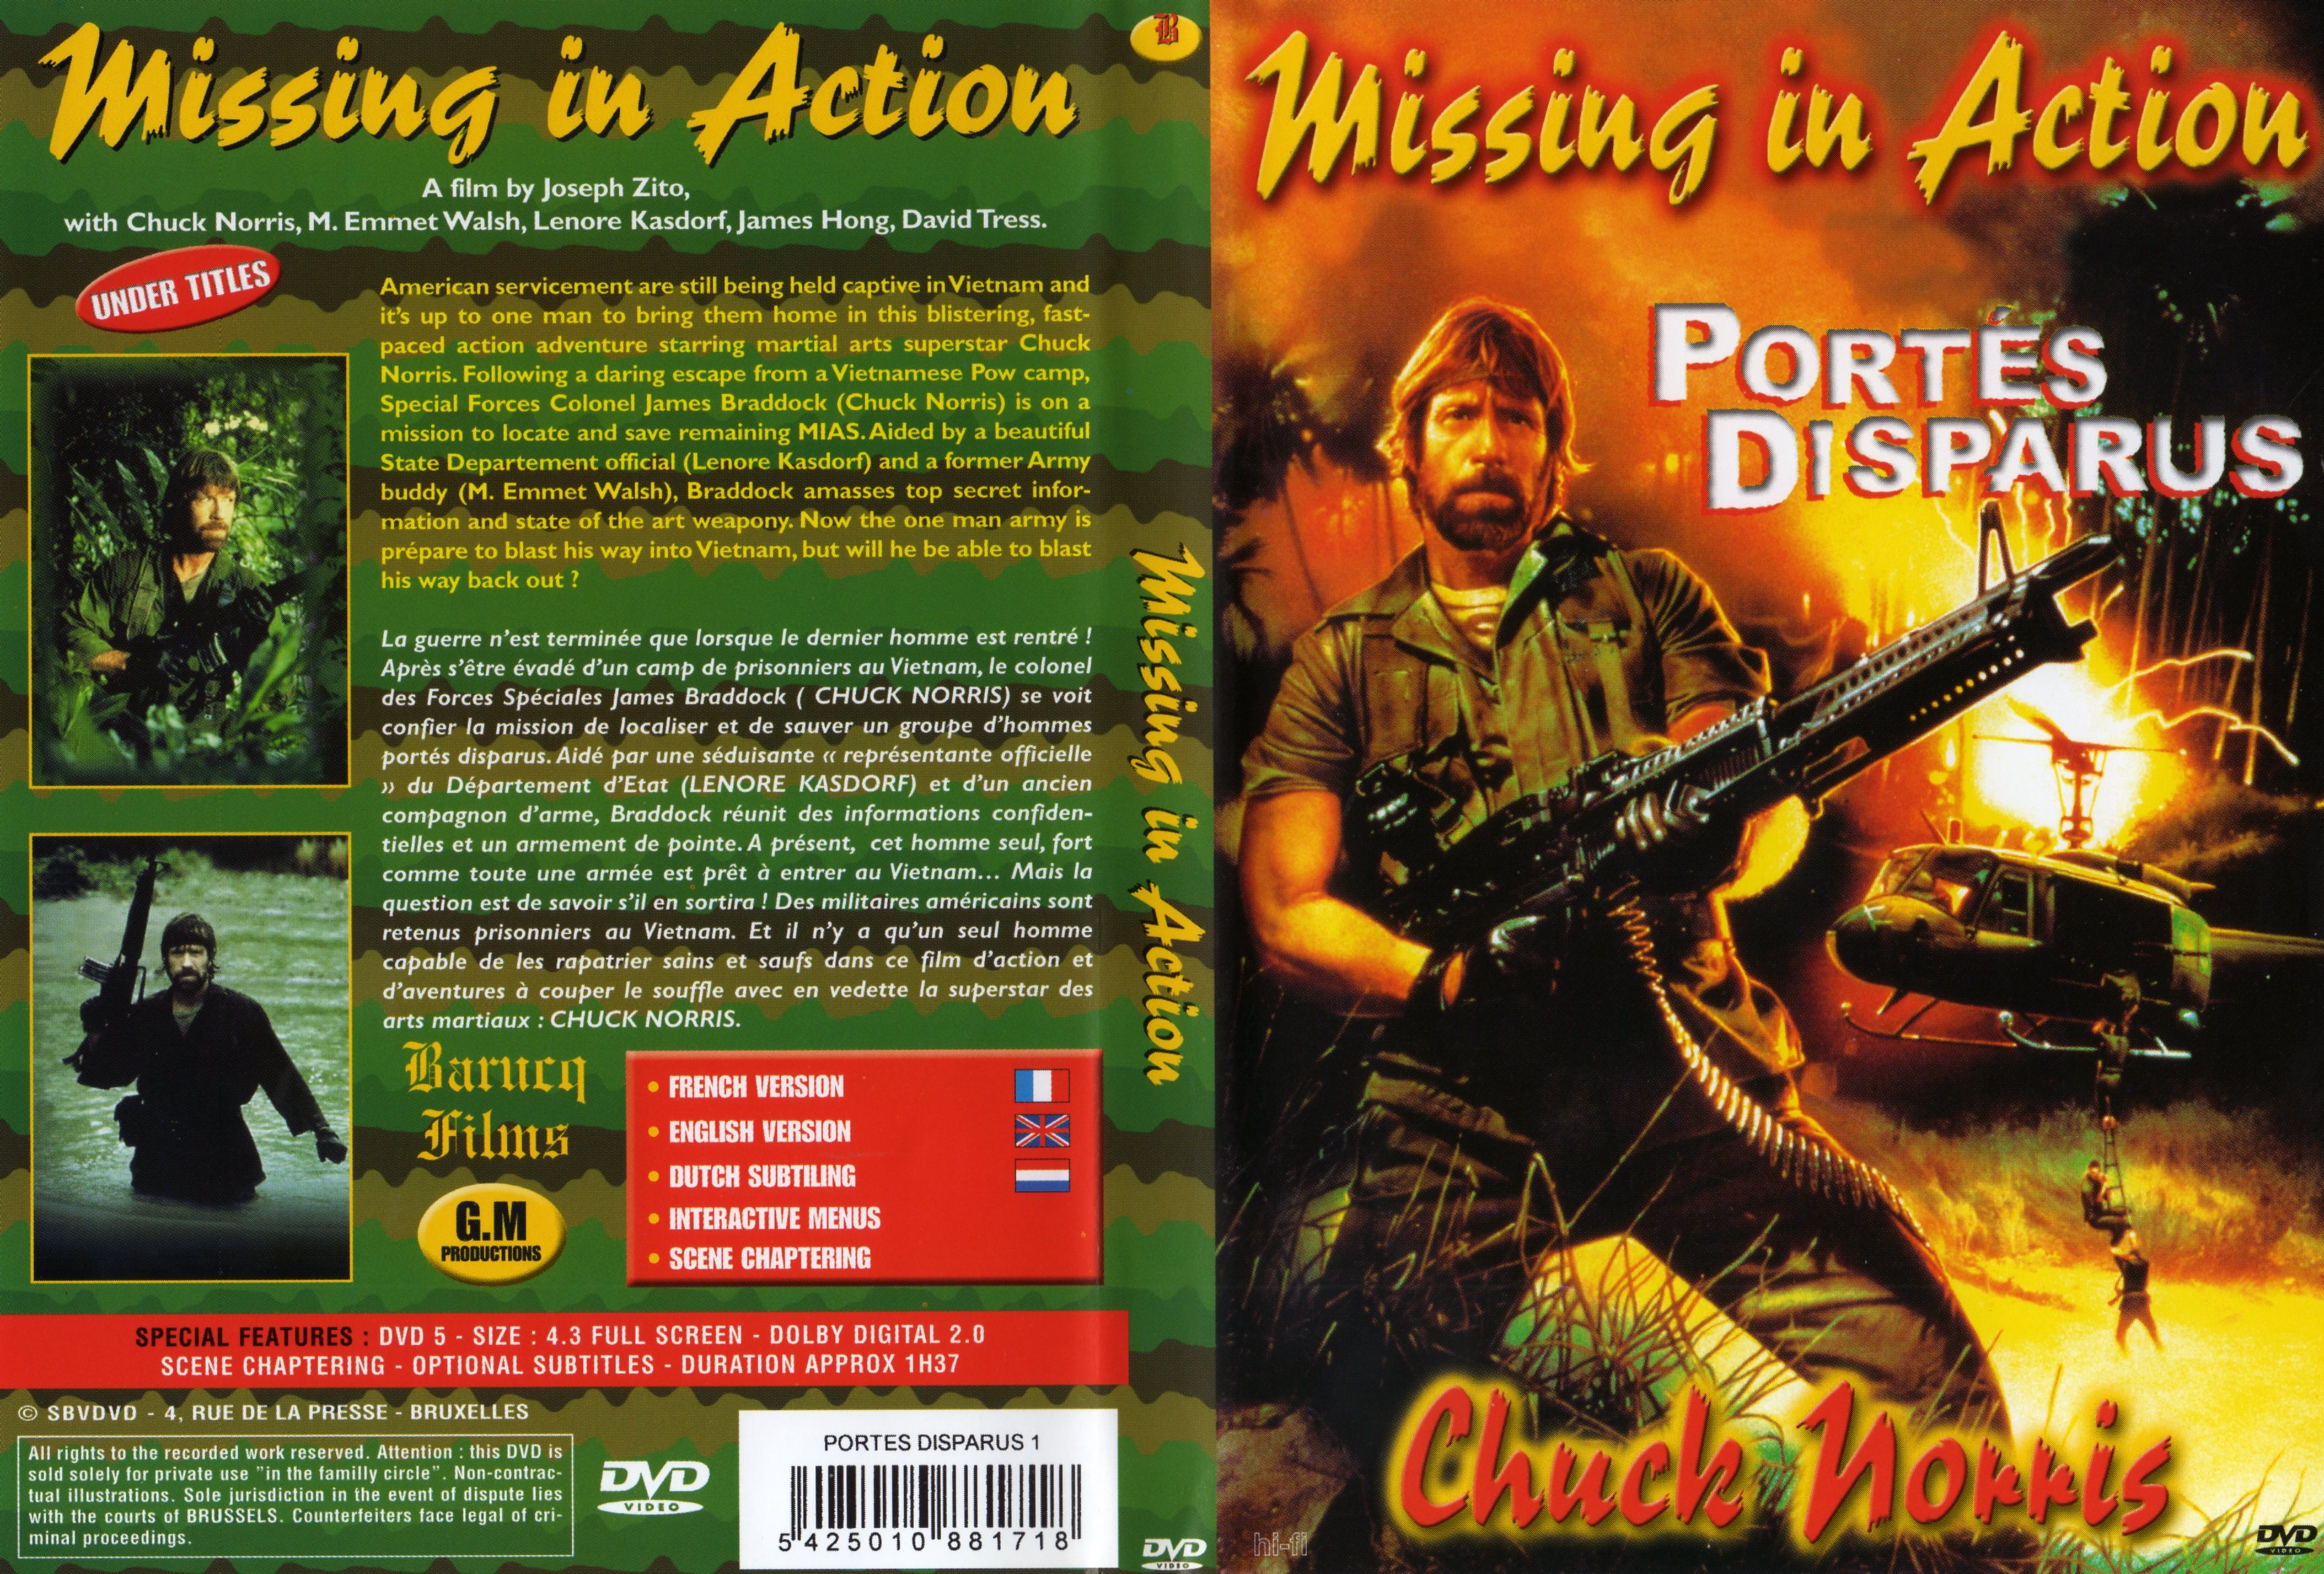 Jaquette DVD Missing in action